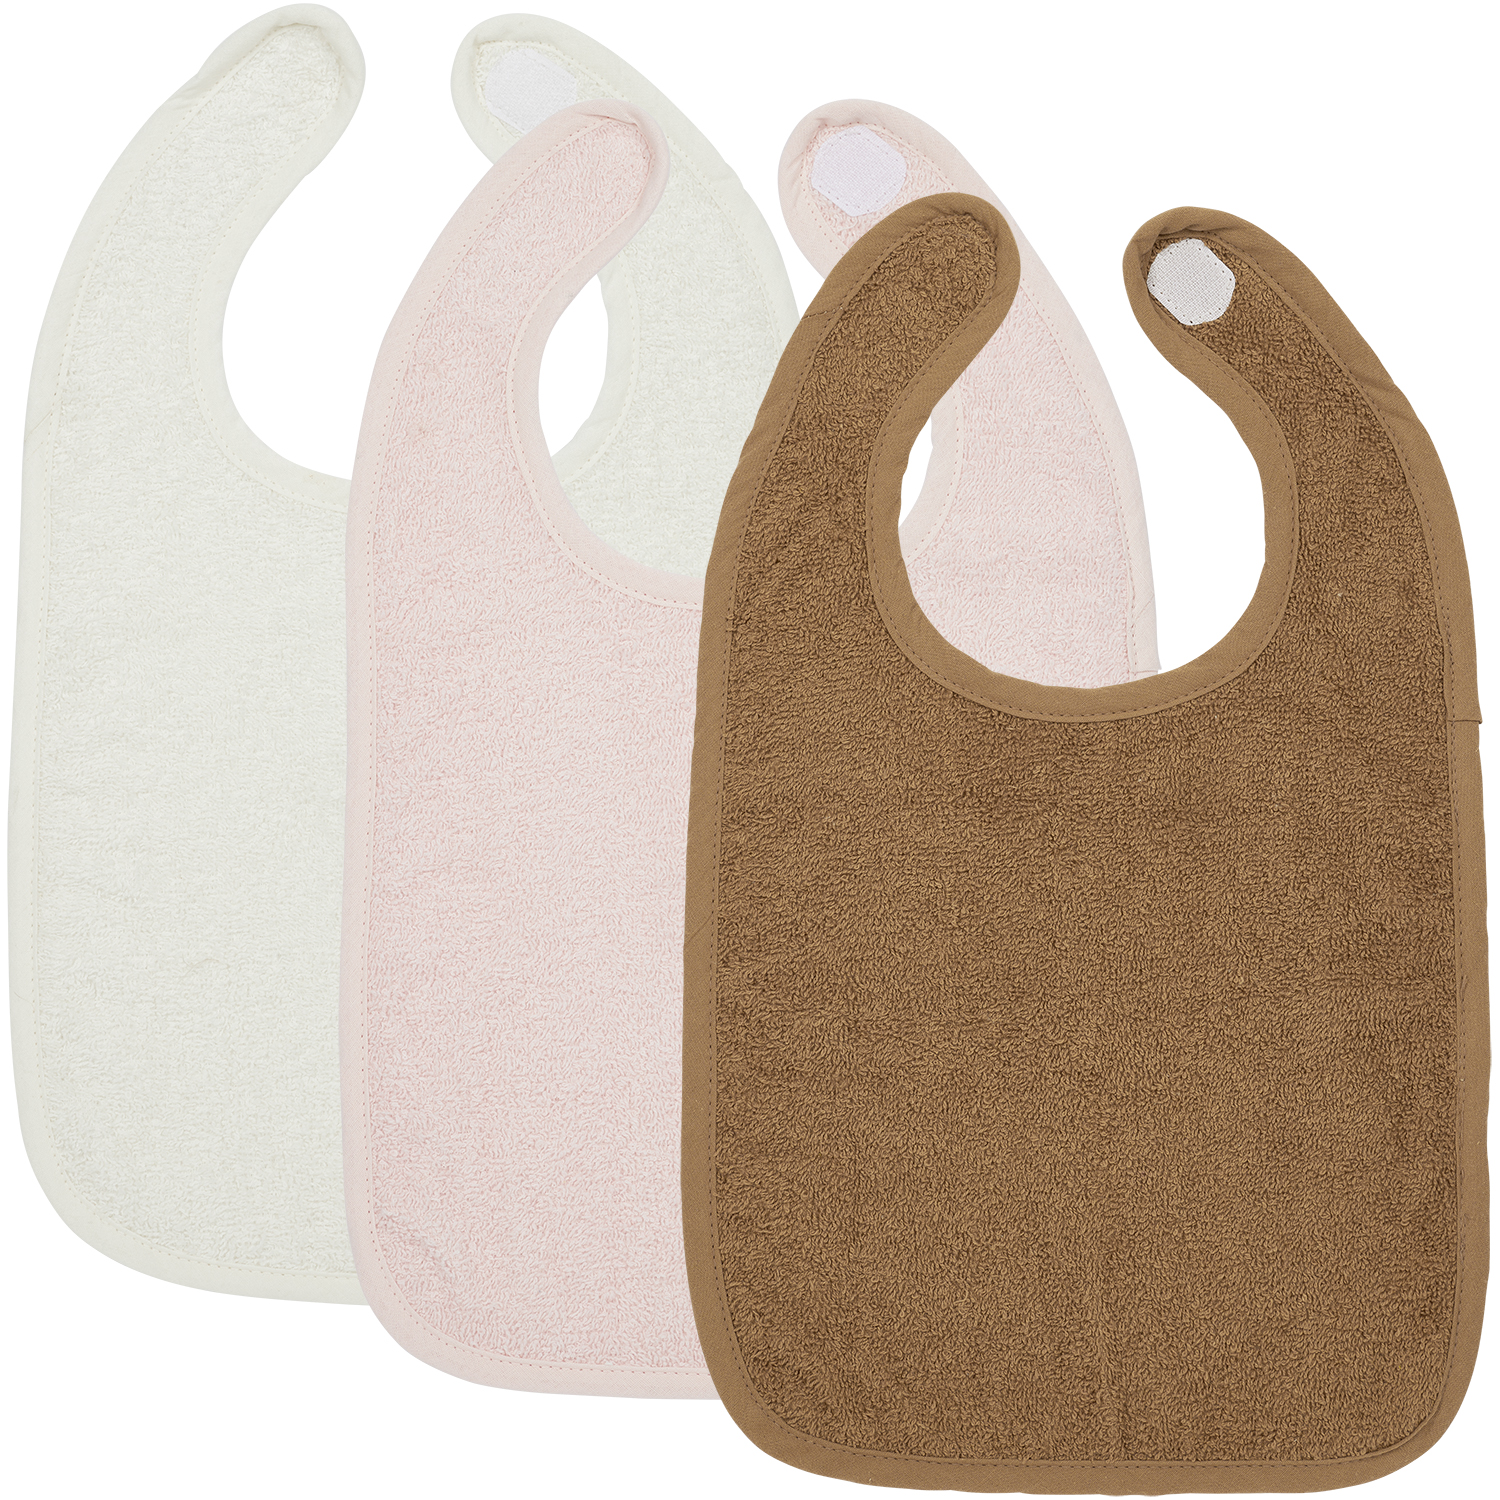 Bib 3-pack terry Uni - offwhite/soft pink/toffee